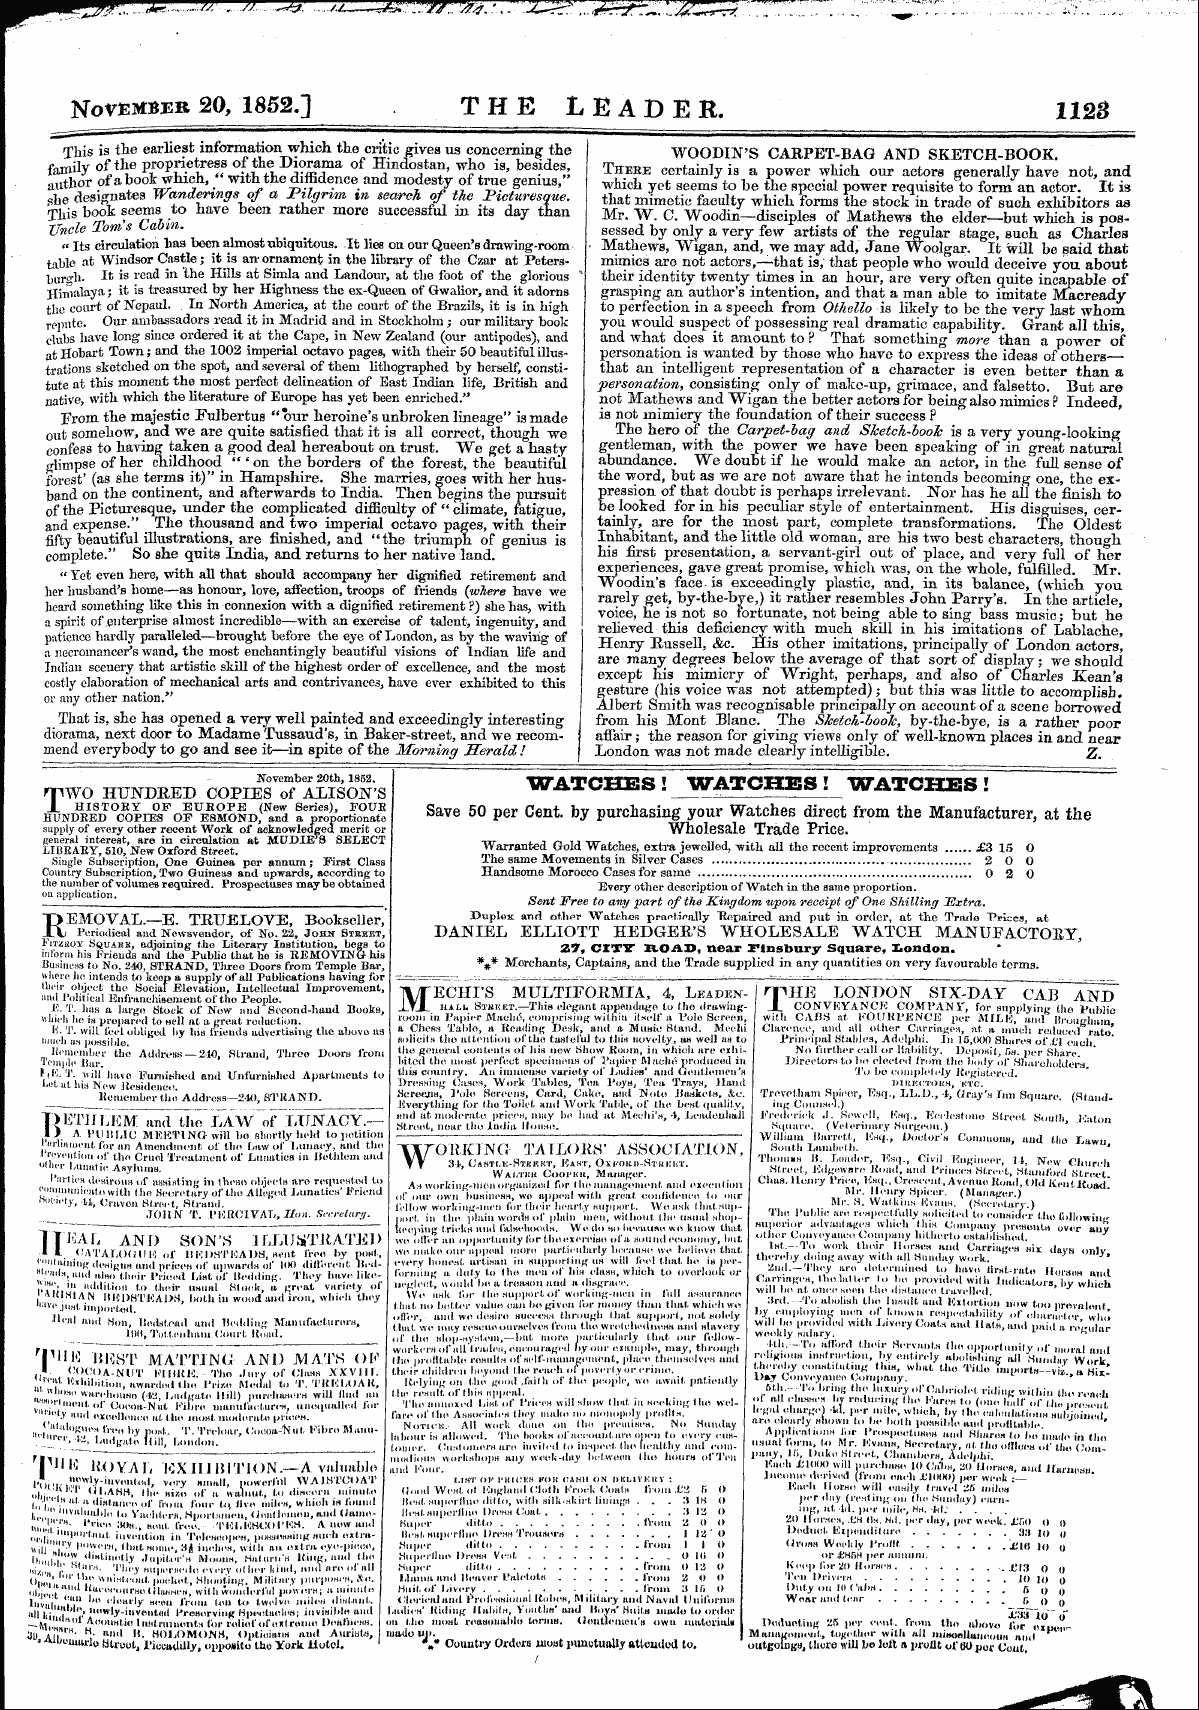 Leader (1850-1860): jS F Y, Town edition - November 20th, 1852. Two Hundred Copies Of Alison's History Of Europe (New Series), Four